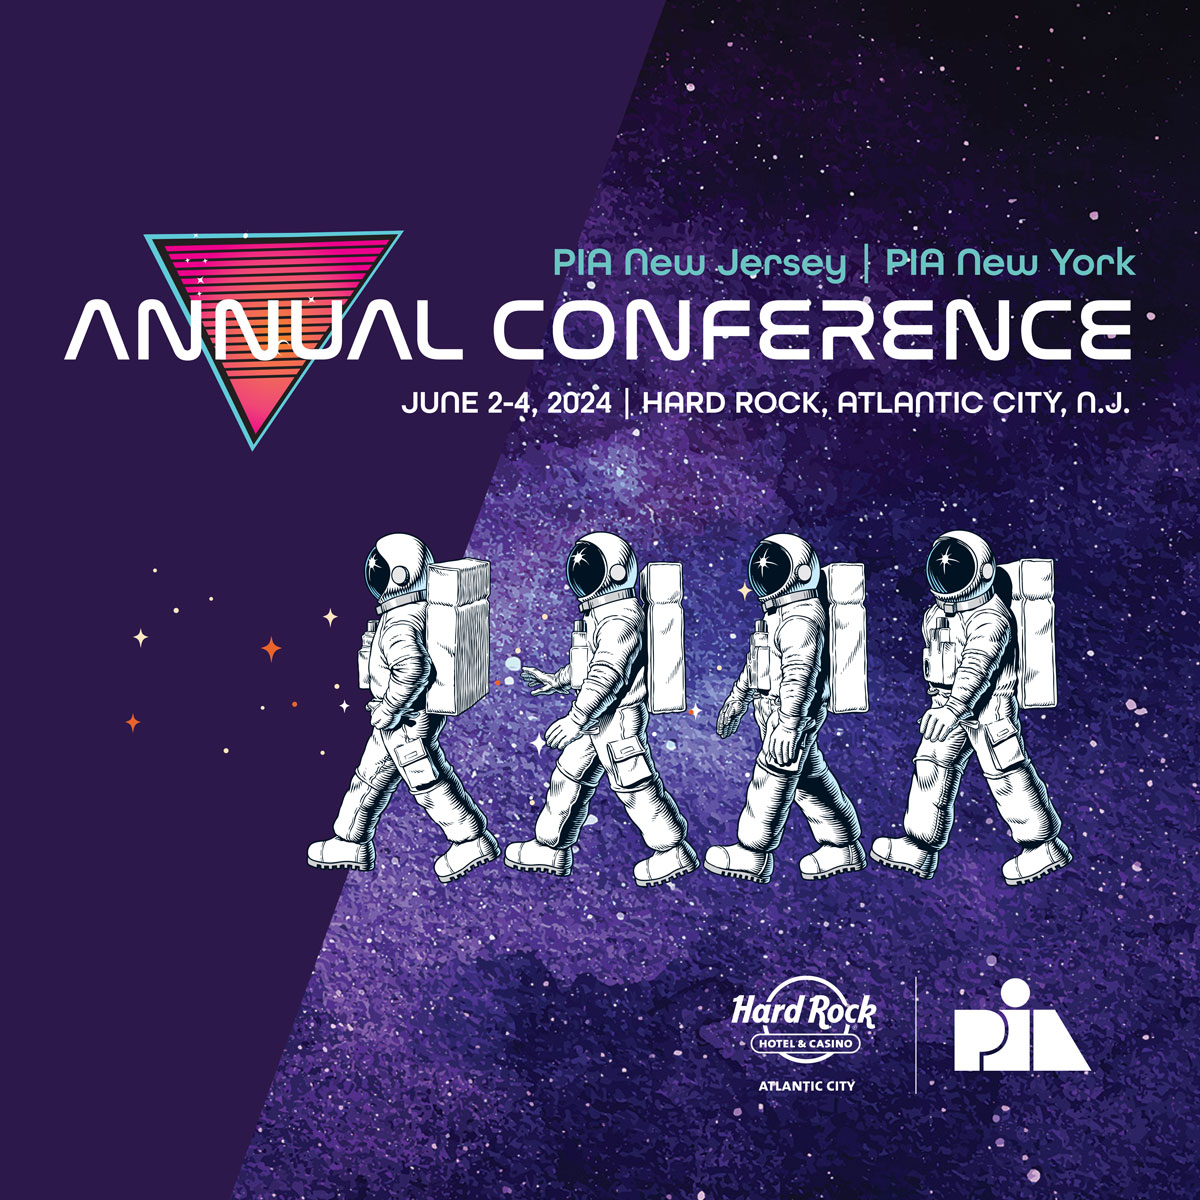 📡 Houston, we have a conference! The 2024 PIA Annual Conference, that is! 🚀 This stellar experience will be the ultimate in cosmic connections with insurance agents, brokers, and extraordinary industry life forms. 🛸 Register now for our best rate! 🎸 lnkd.in/gSvMNG8t